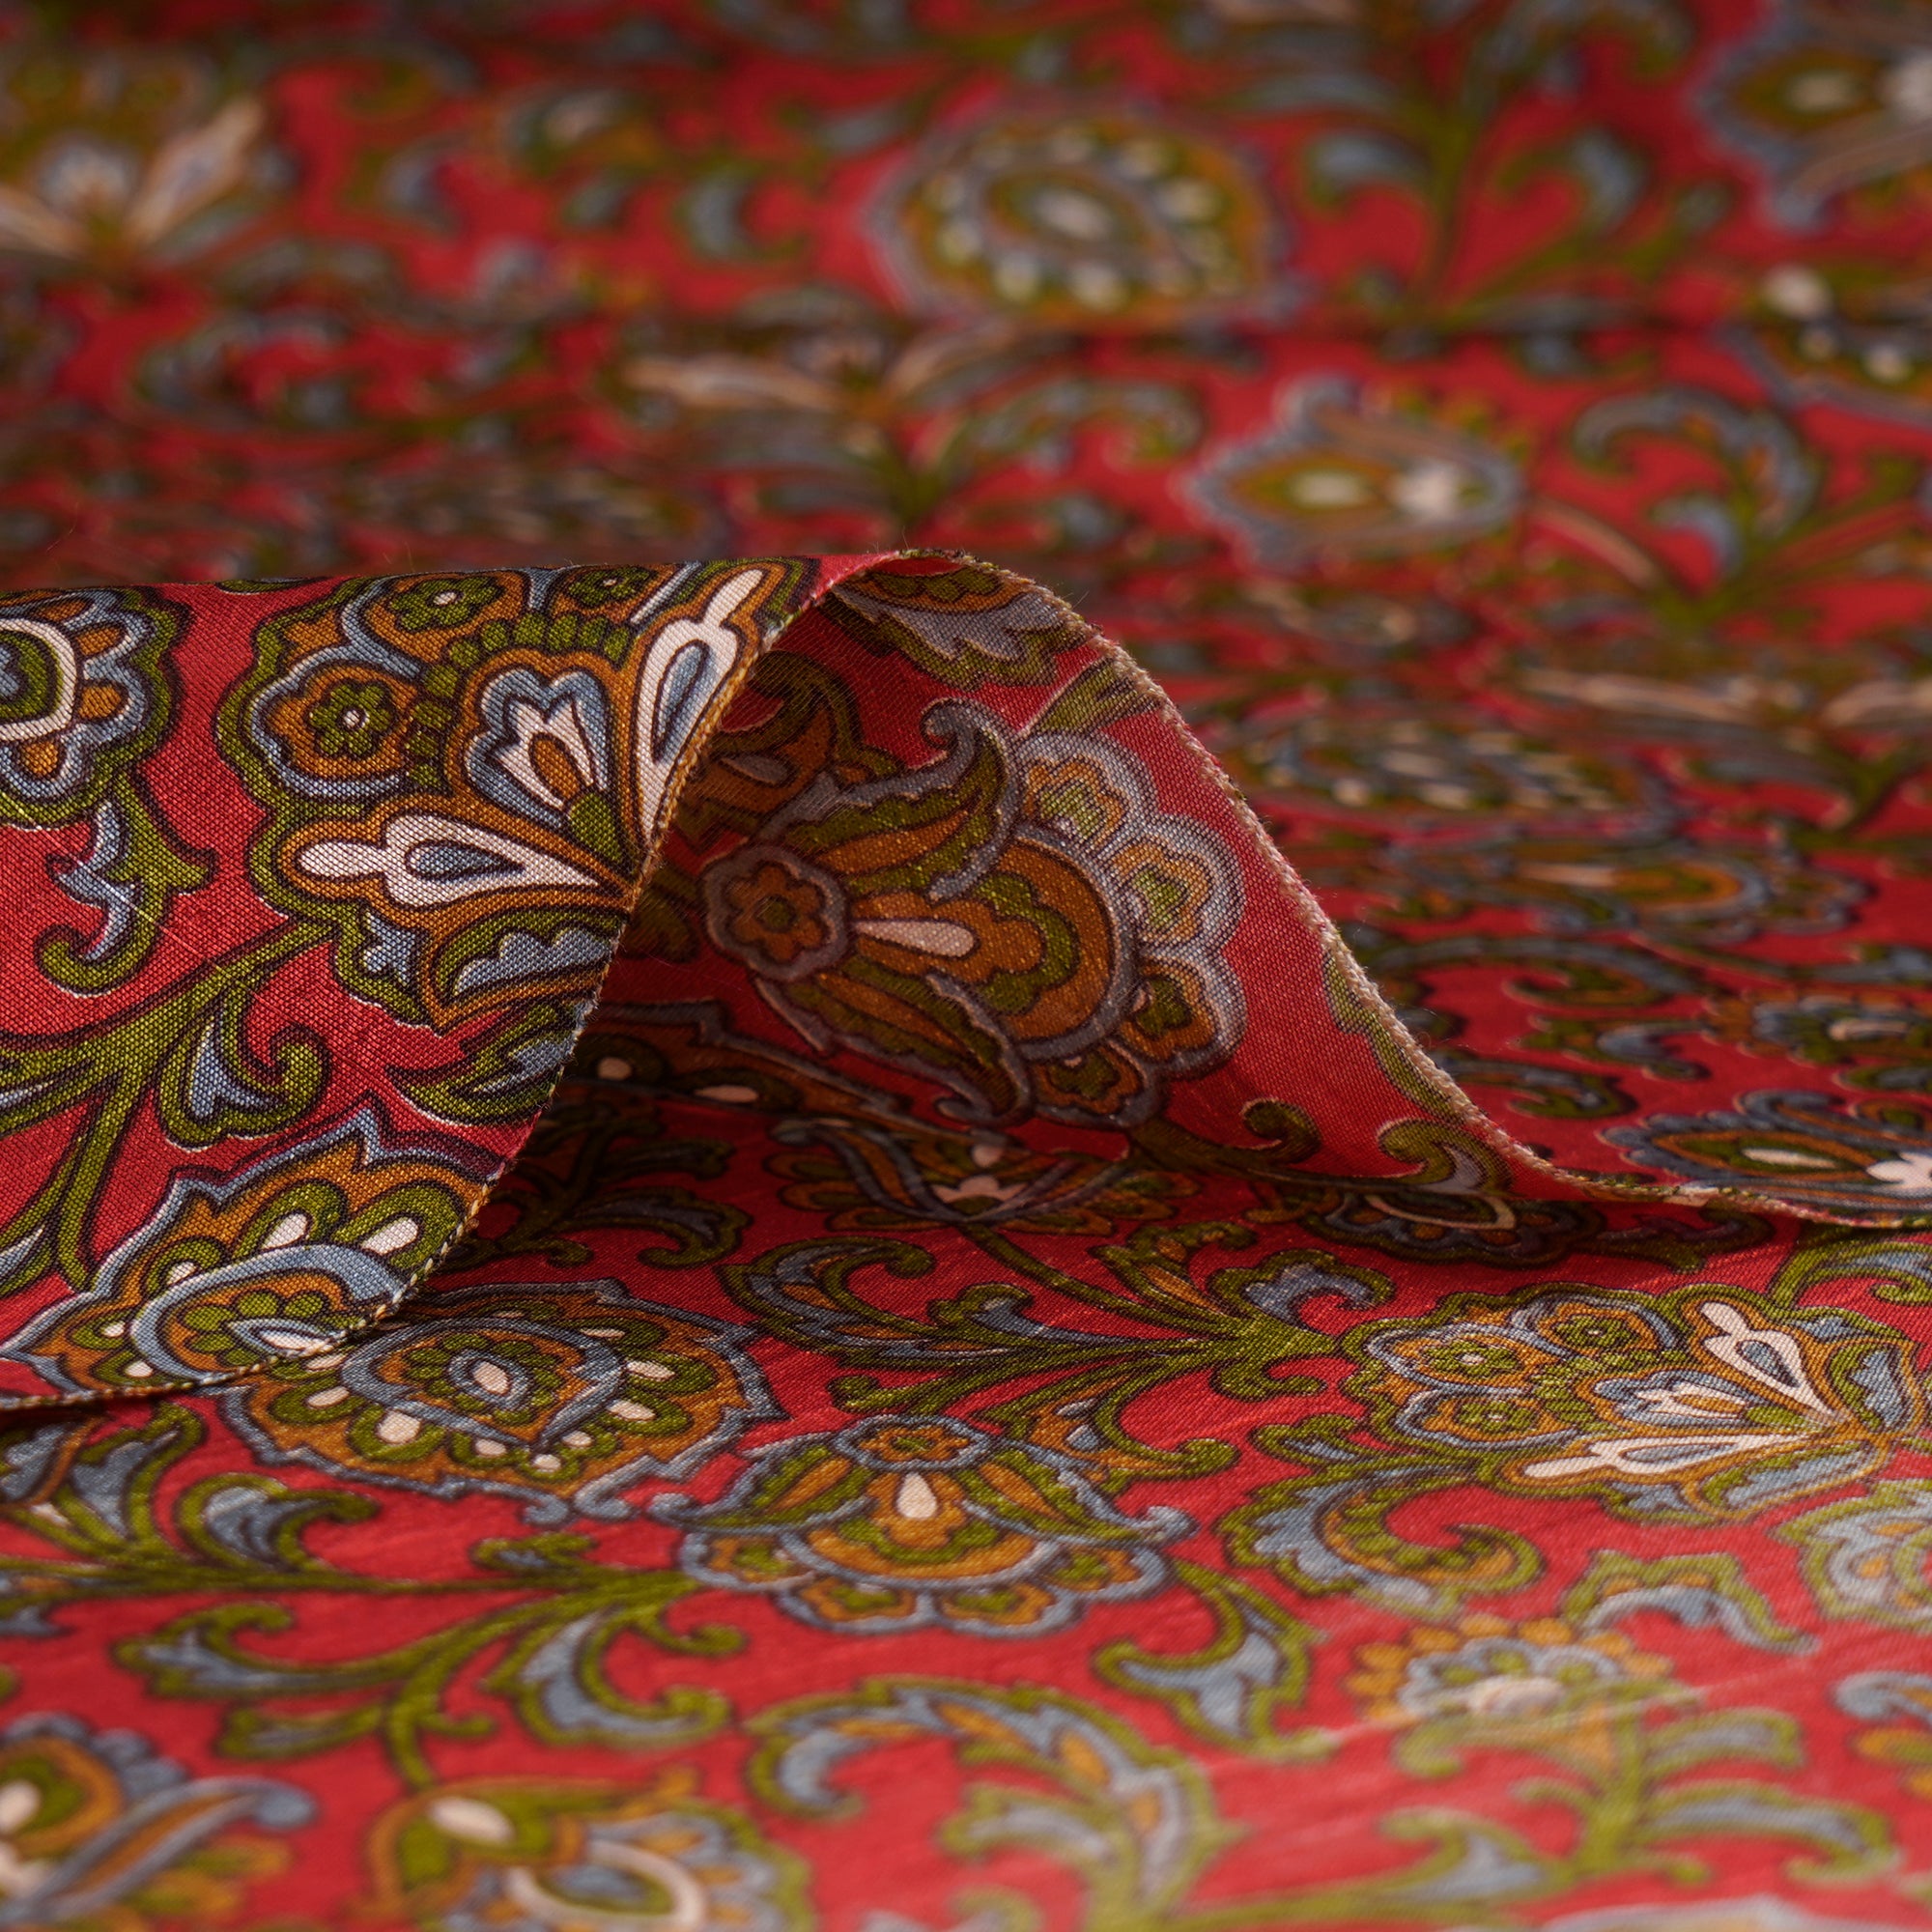 Red-Green Color Printed Dupion Silk Fabric